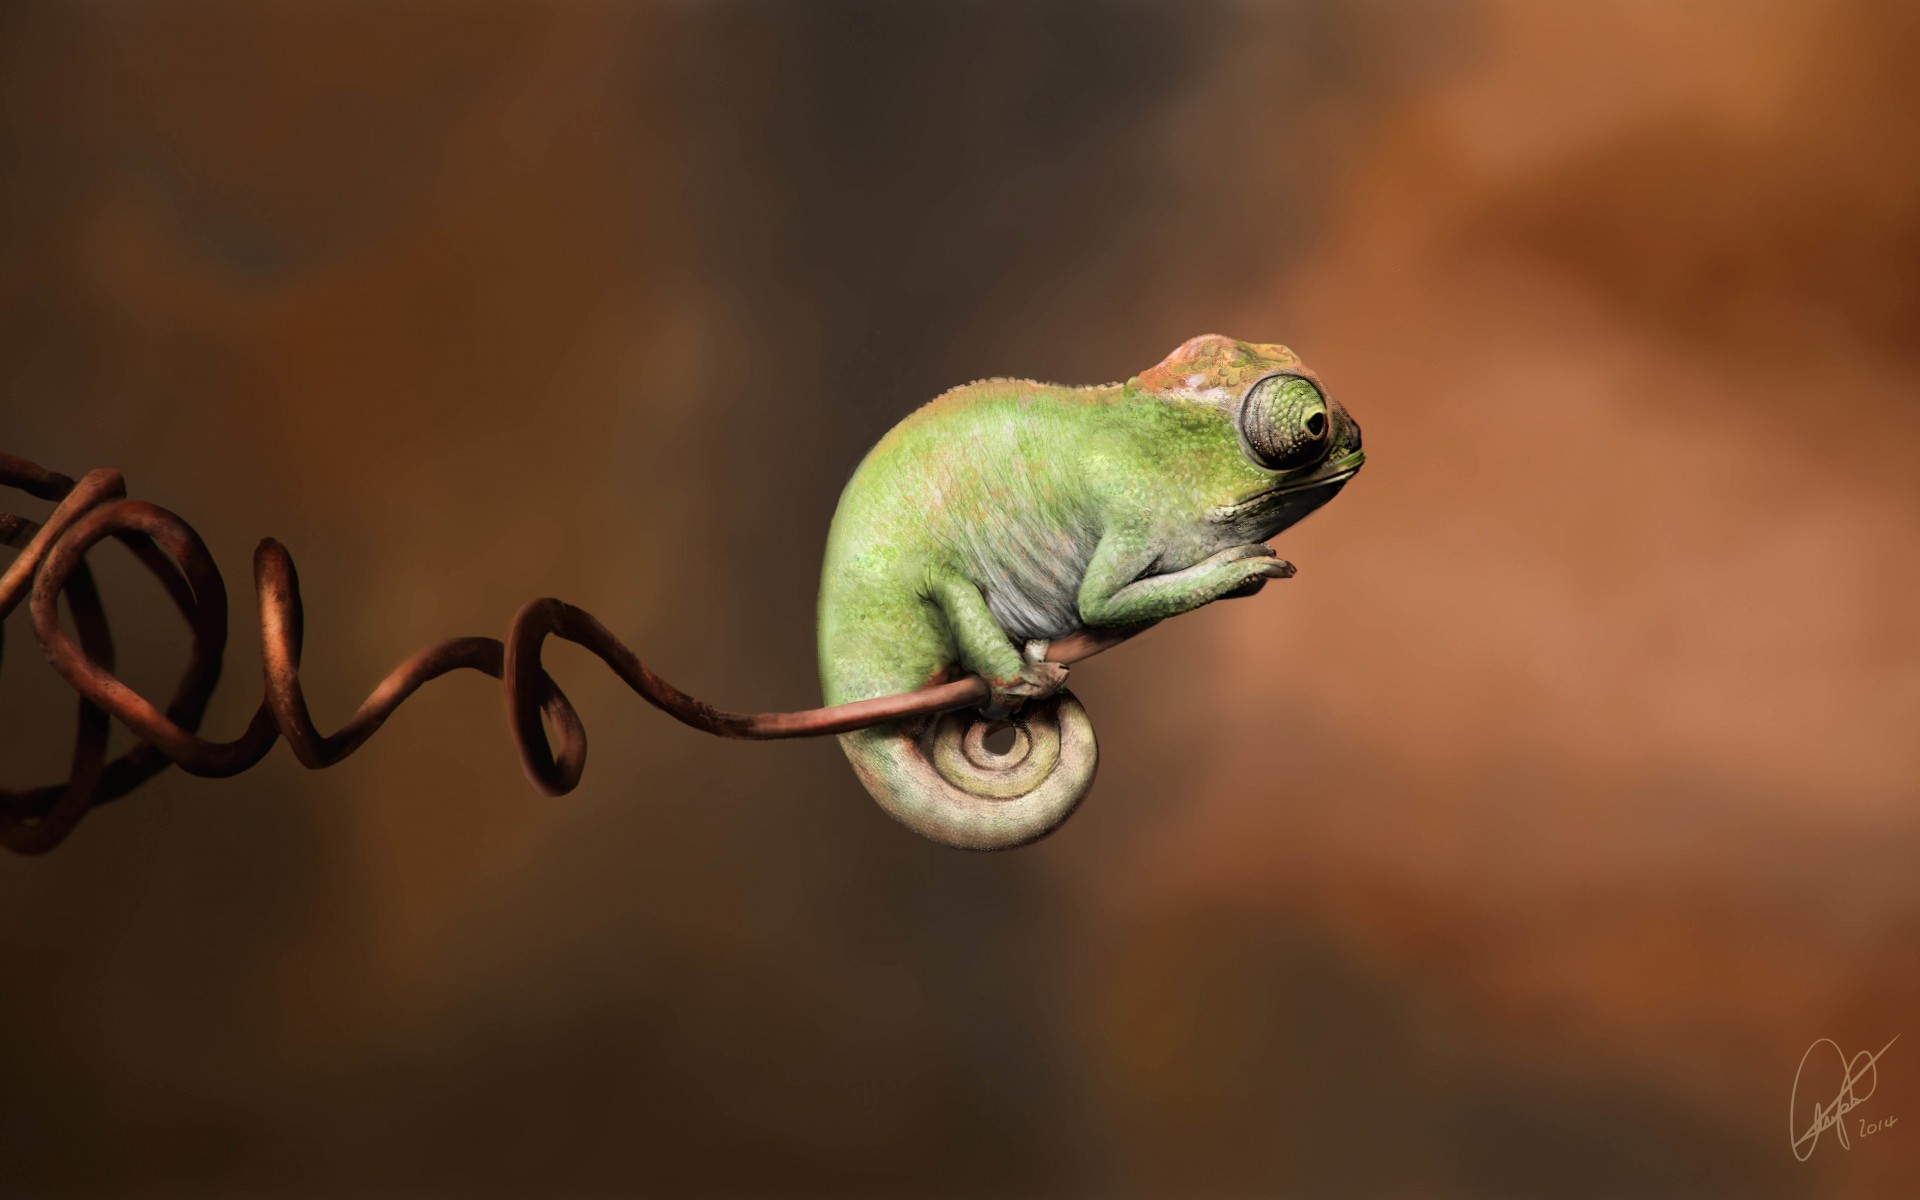 Baby Chameleon Perching On a Twisted Branch Wallpaper for Desktop 1920x1200